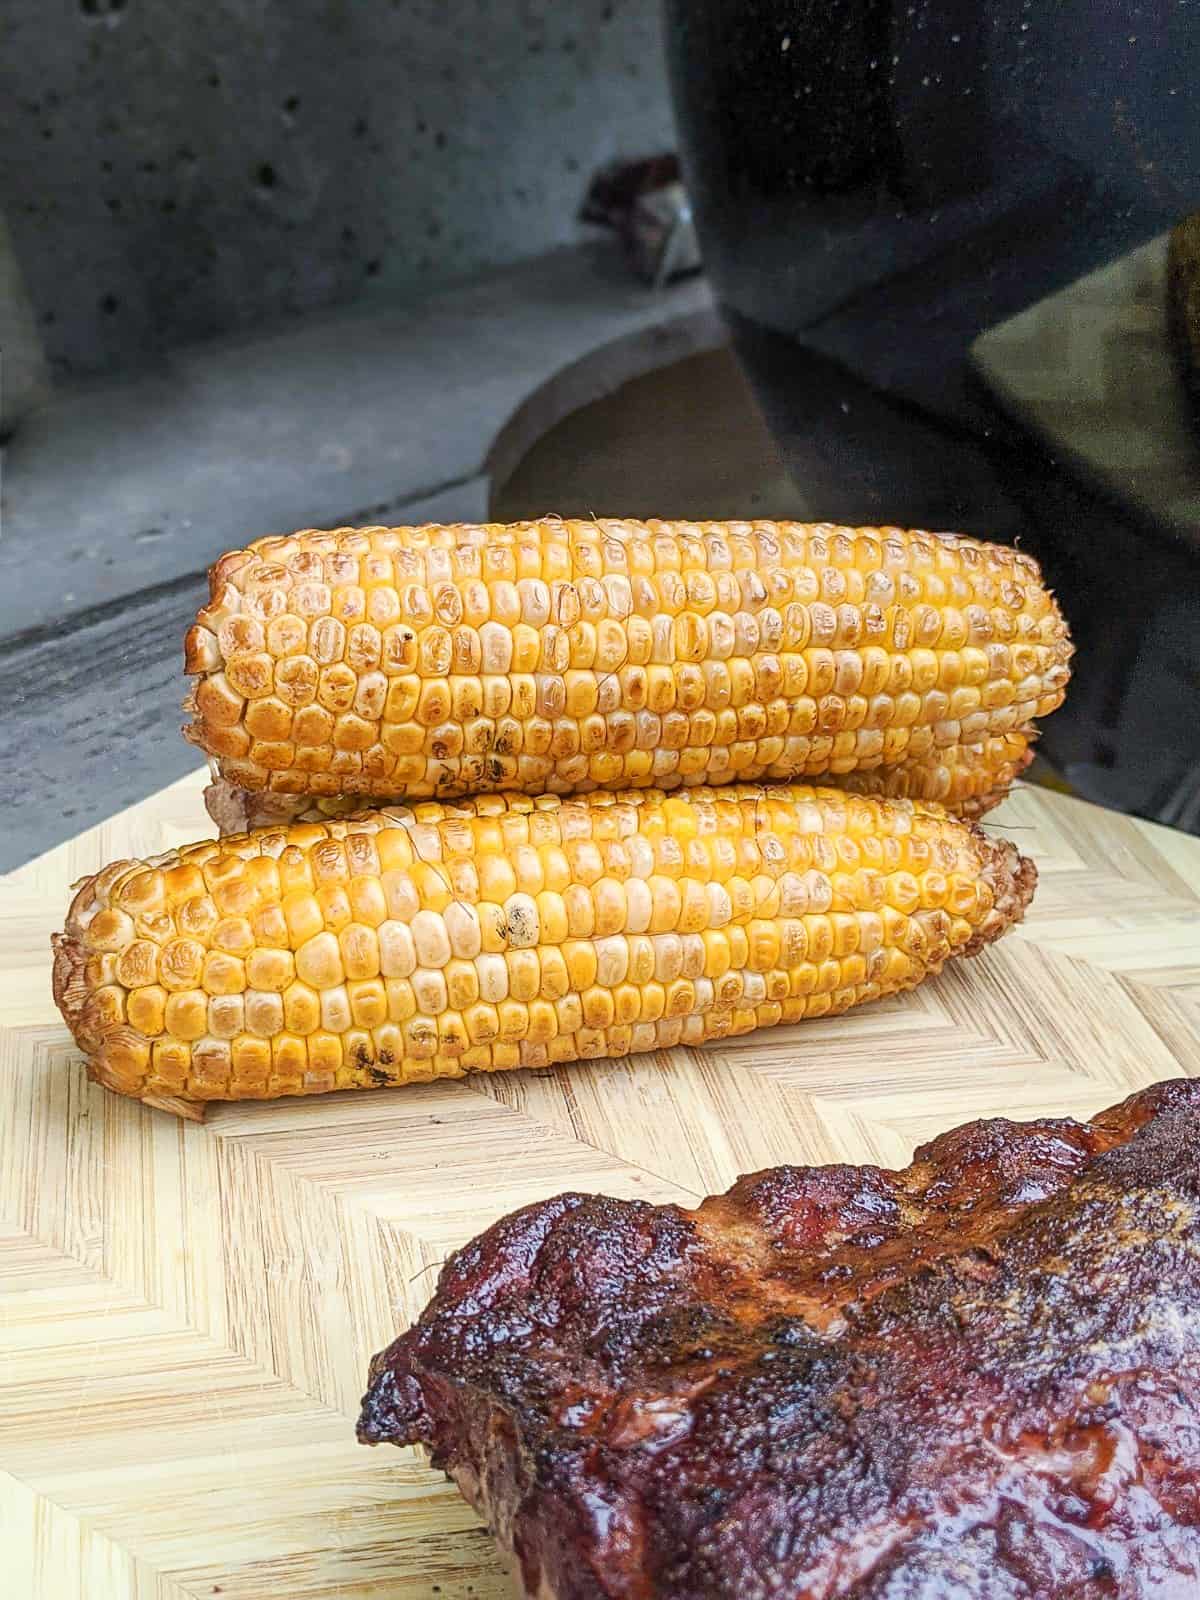 Smoked Corn On The Cob Recipe By Blackberry Babe,Pet Snakes Black